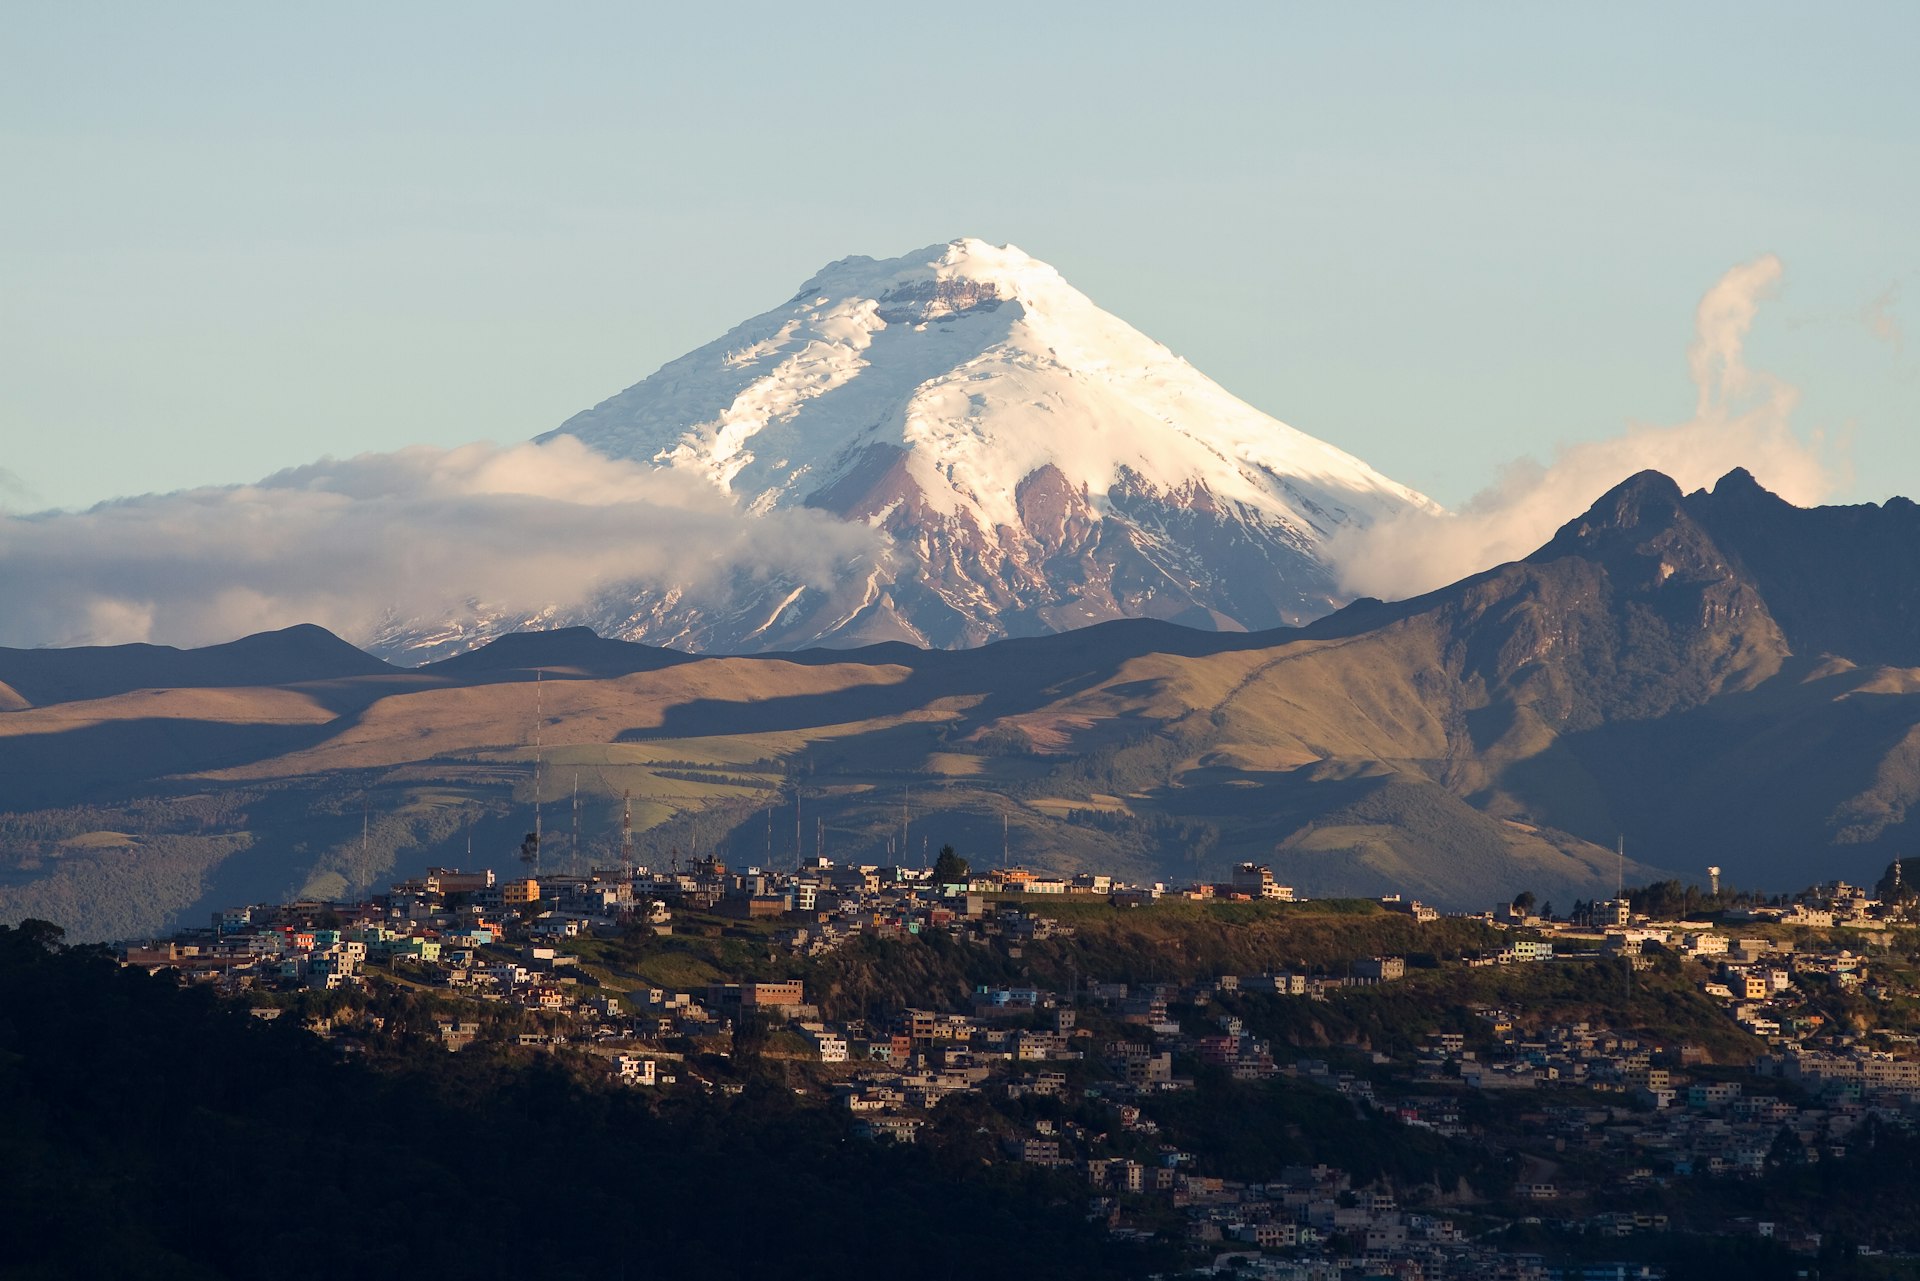 View towards the Cotopaxi volcano, Ecuador, with its summit covered in snow